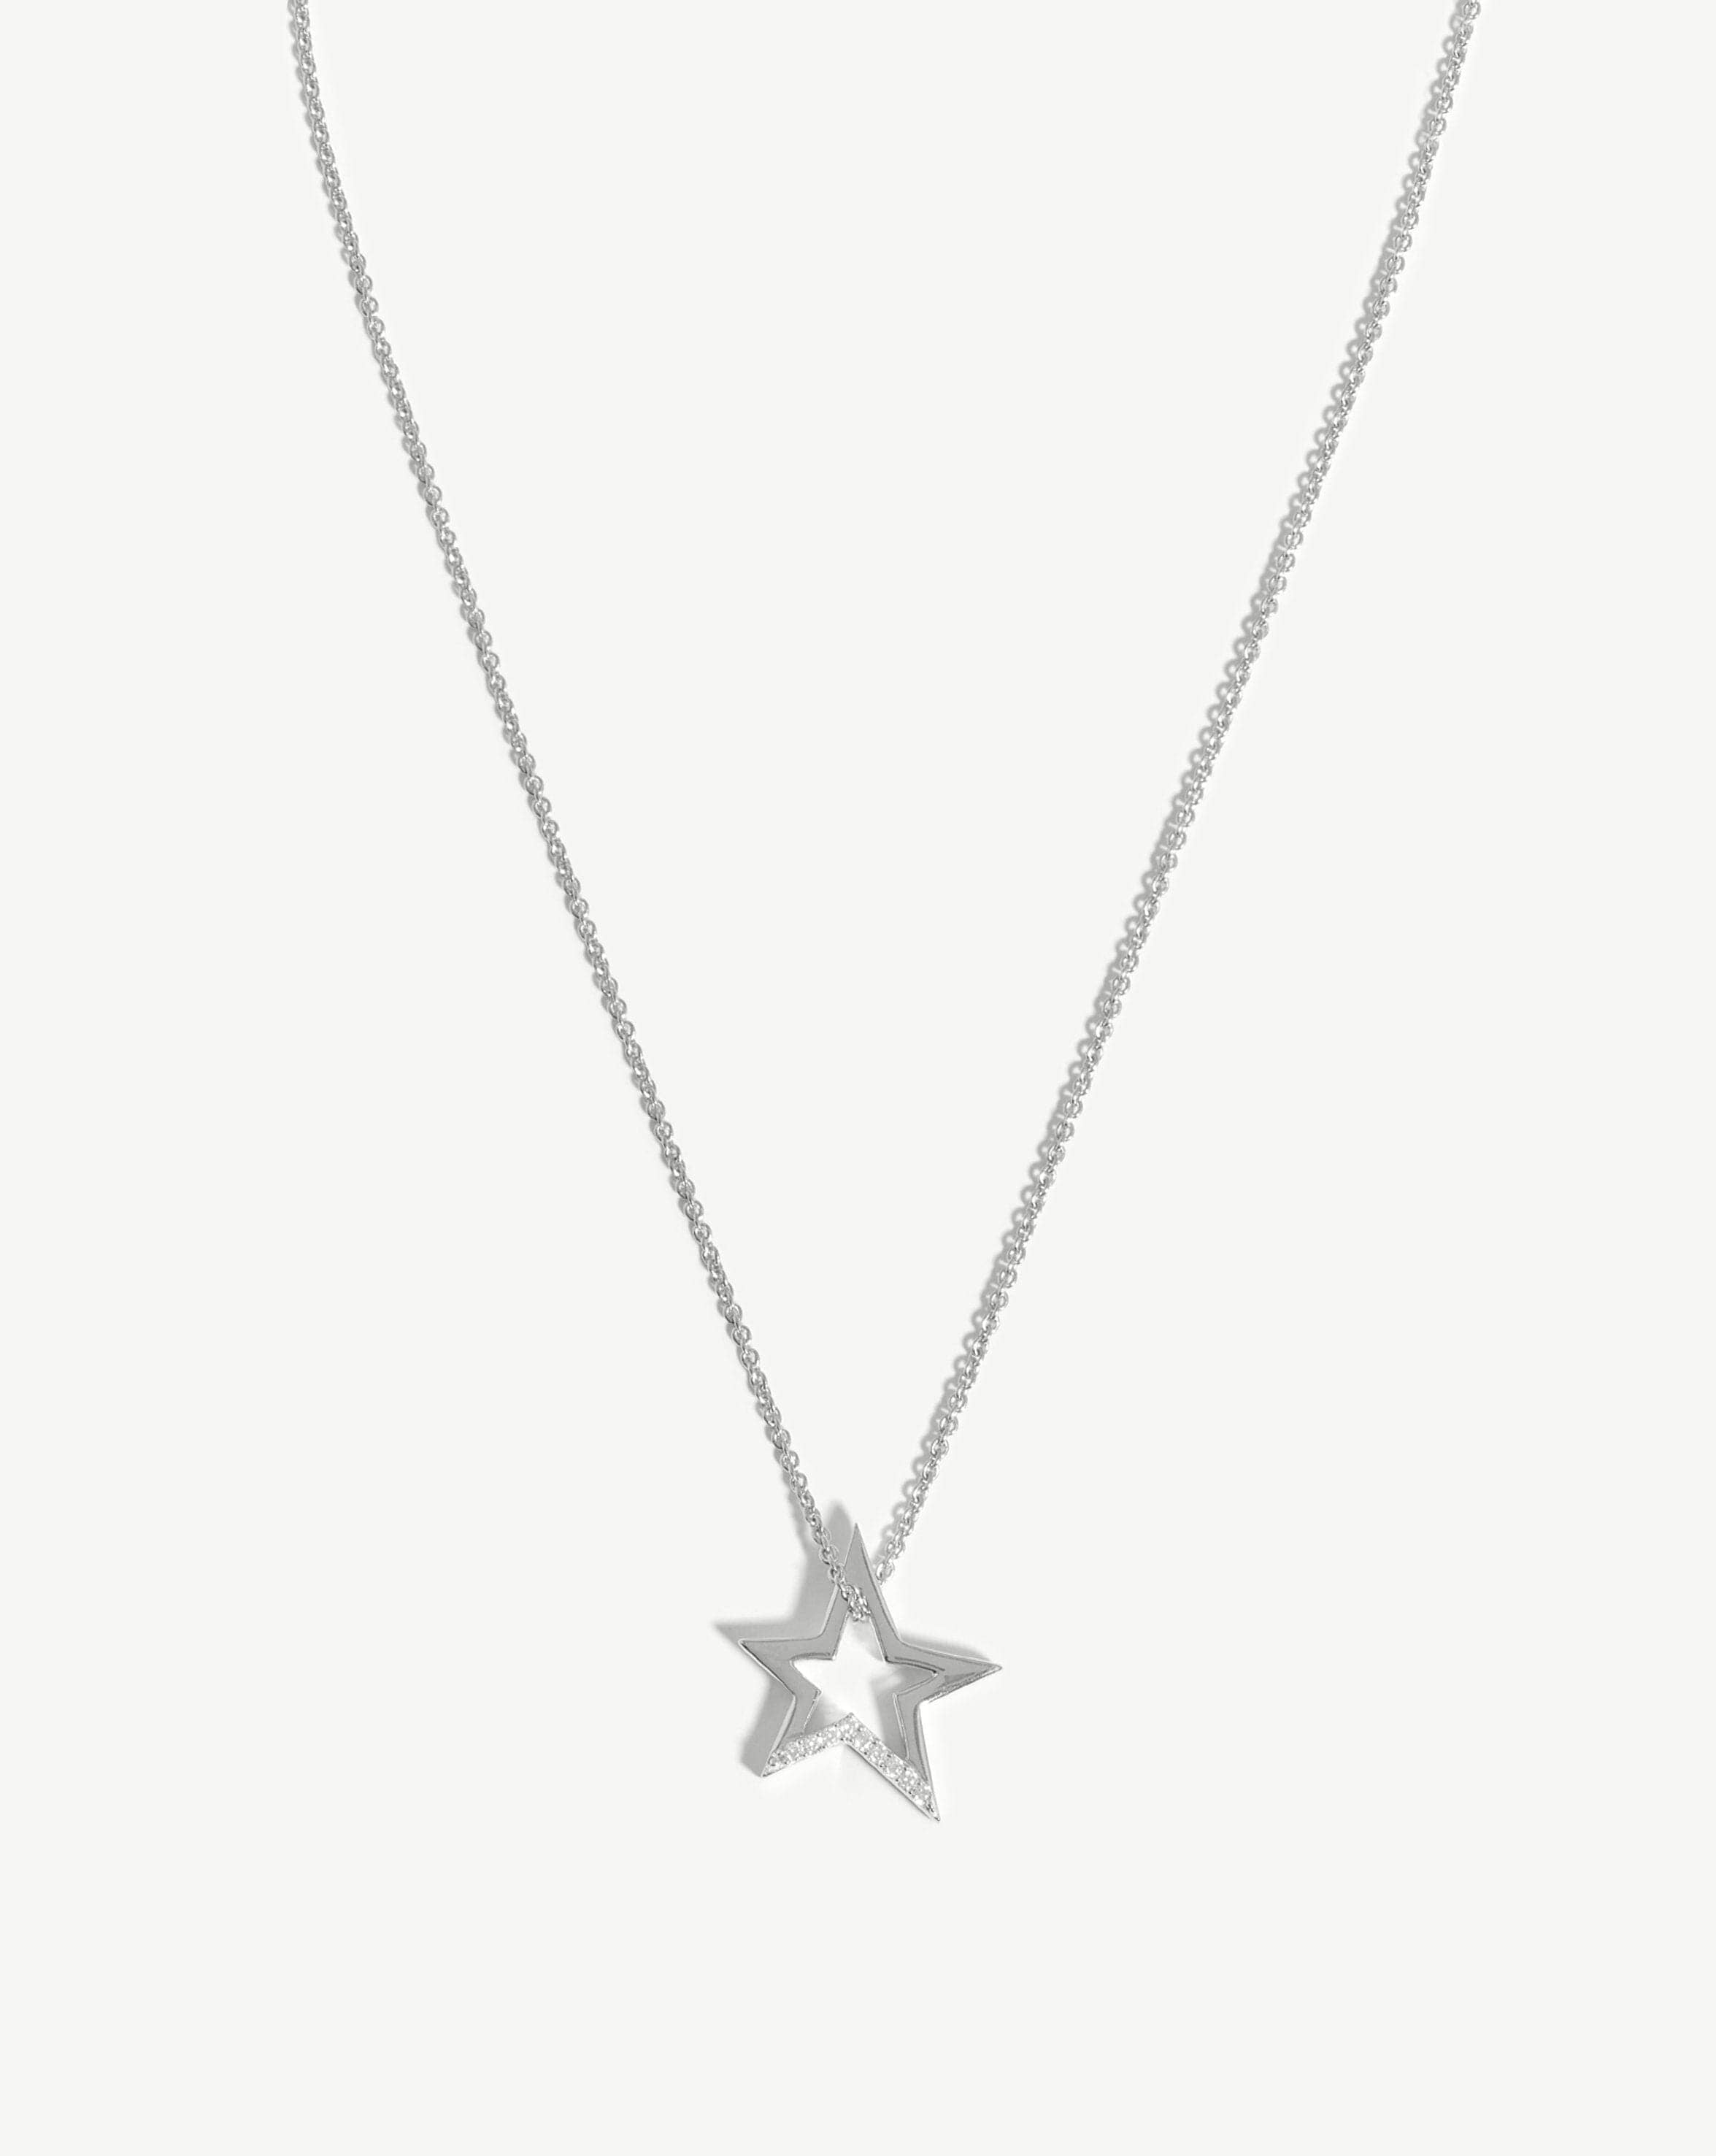 Celestial Star Pave Pendant Necklace | Sterling Silver/Cubic Zirconia Necklaces Missoma 